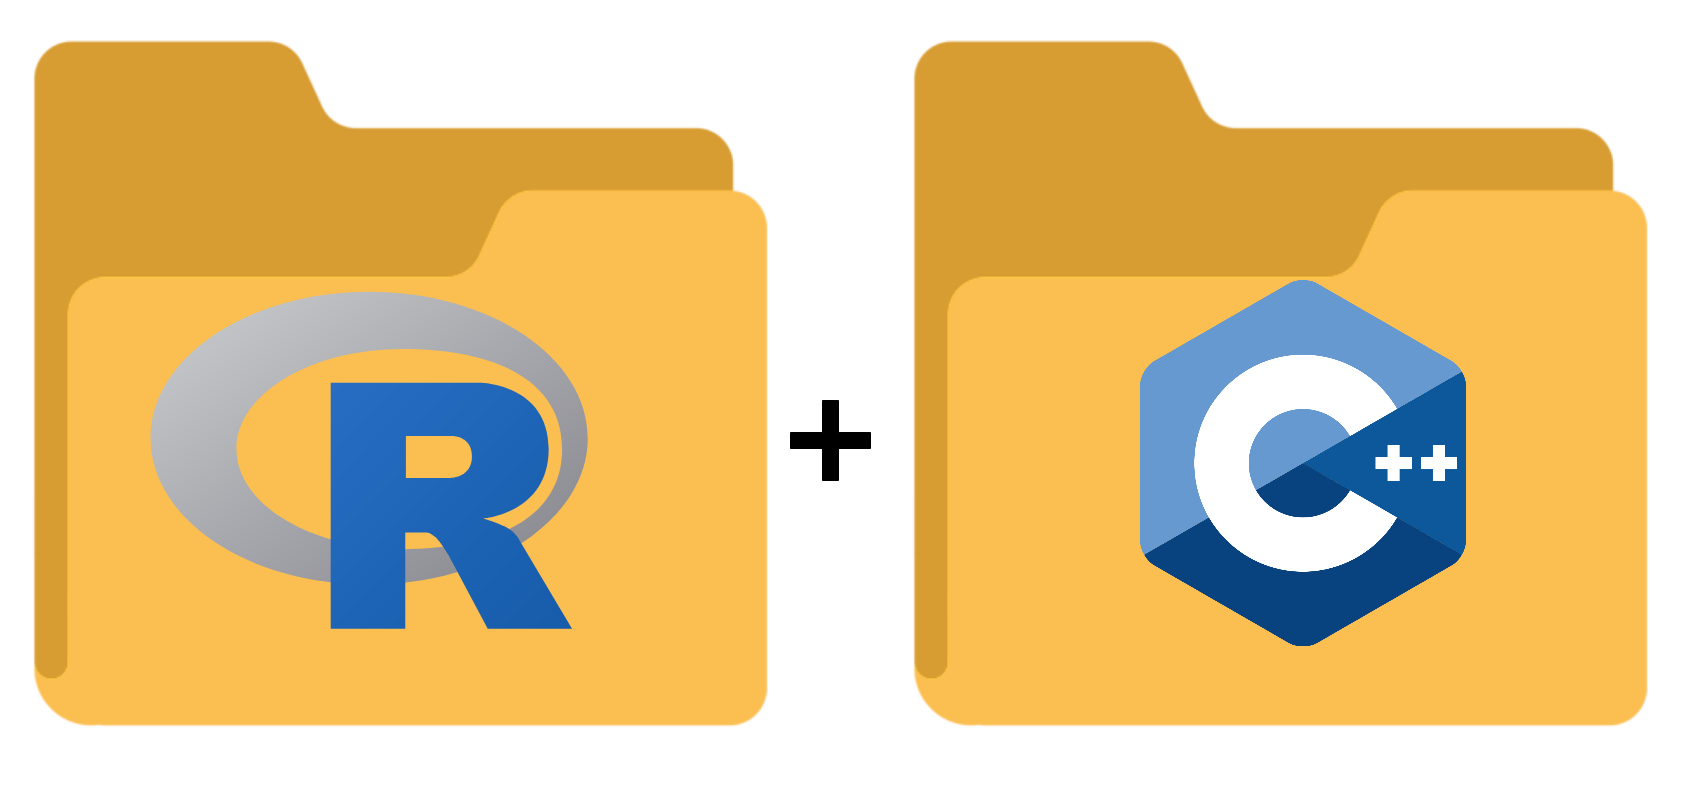 Graphic showing R inside a folder icon, then a plus sign, then C++ logo inside a folder icon